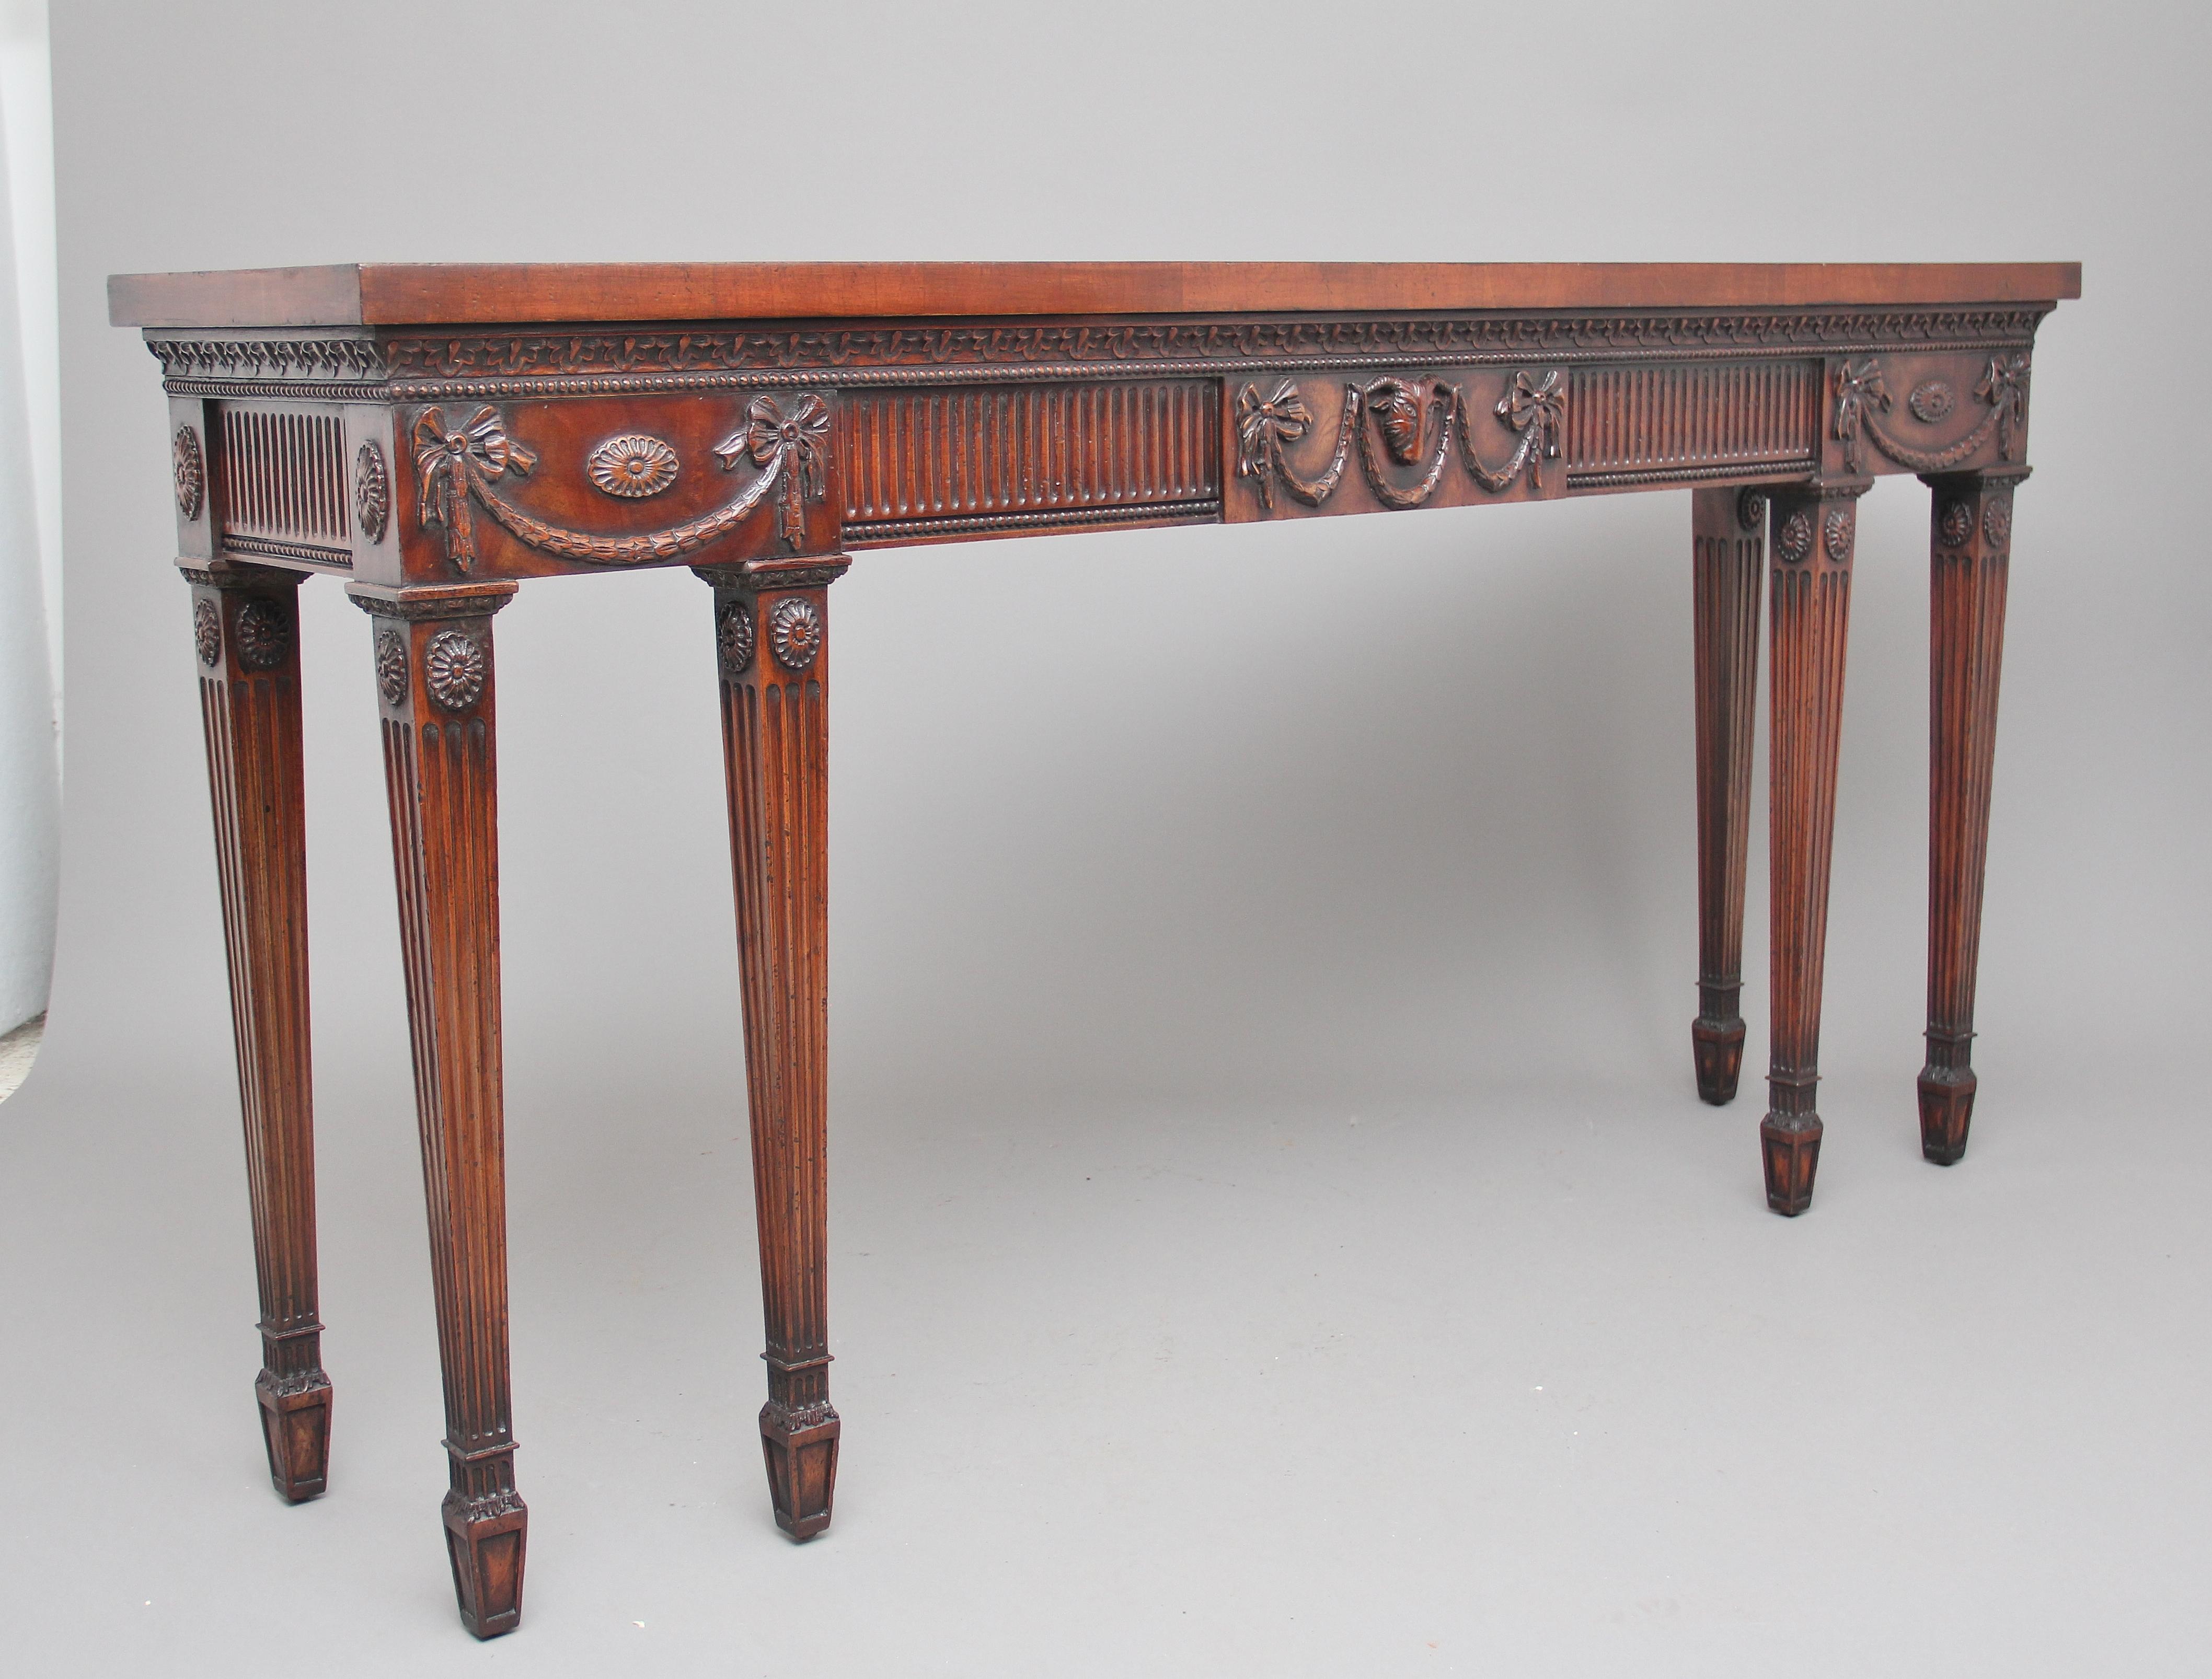 Mid-20th century mahogany serving table in the 18th century style of Robert Adam, the rectangular top above a profusely decorated frieze with lovely quality mouldings, patraes and swags, supported on six elegant fluted legs terminating on spade